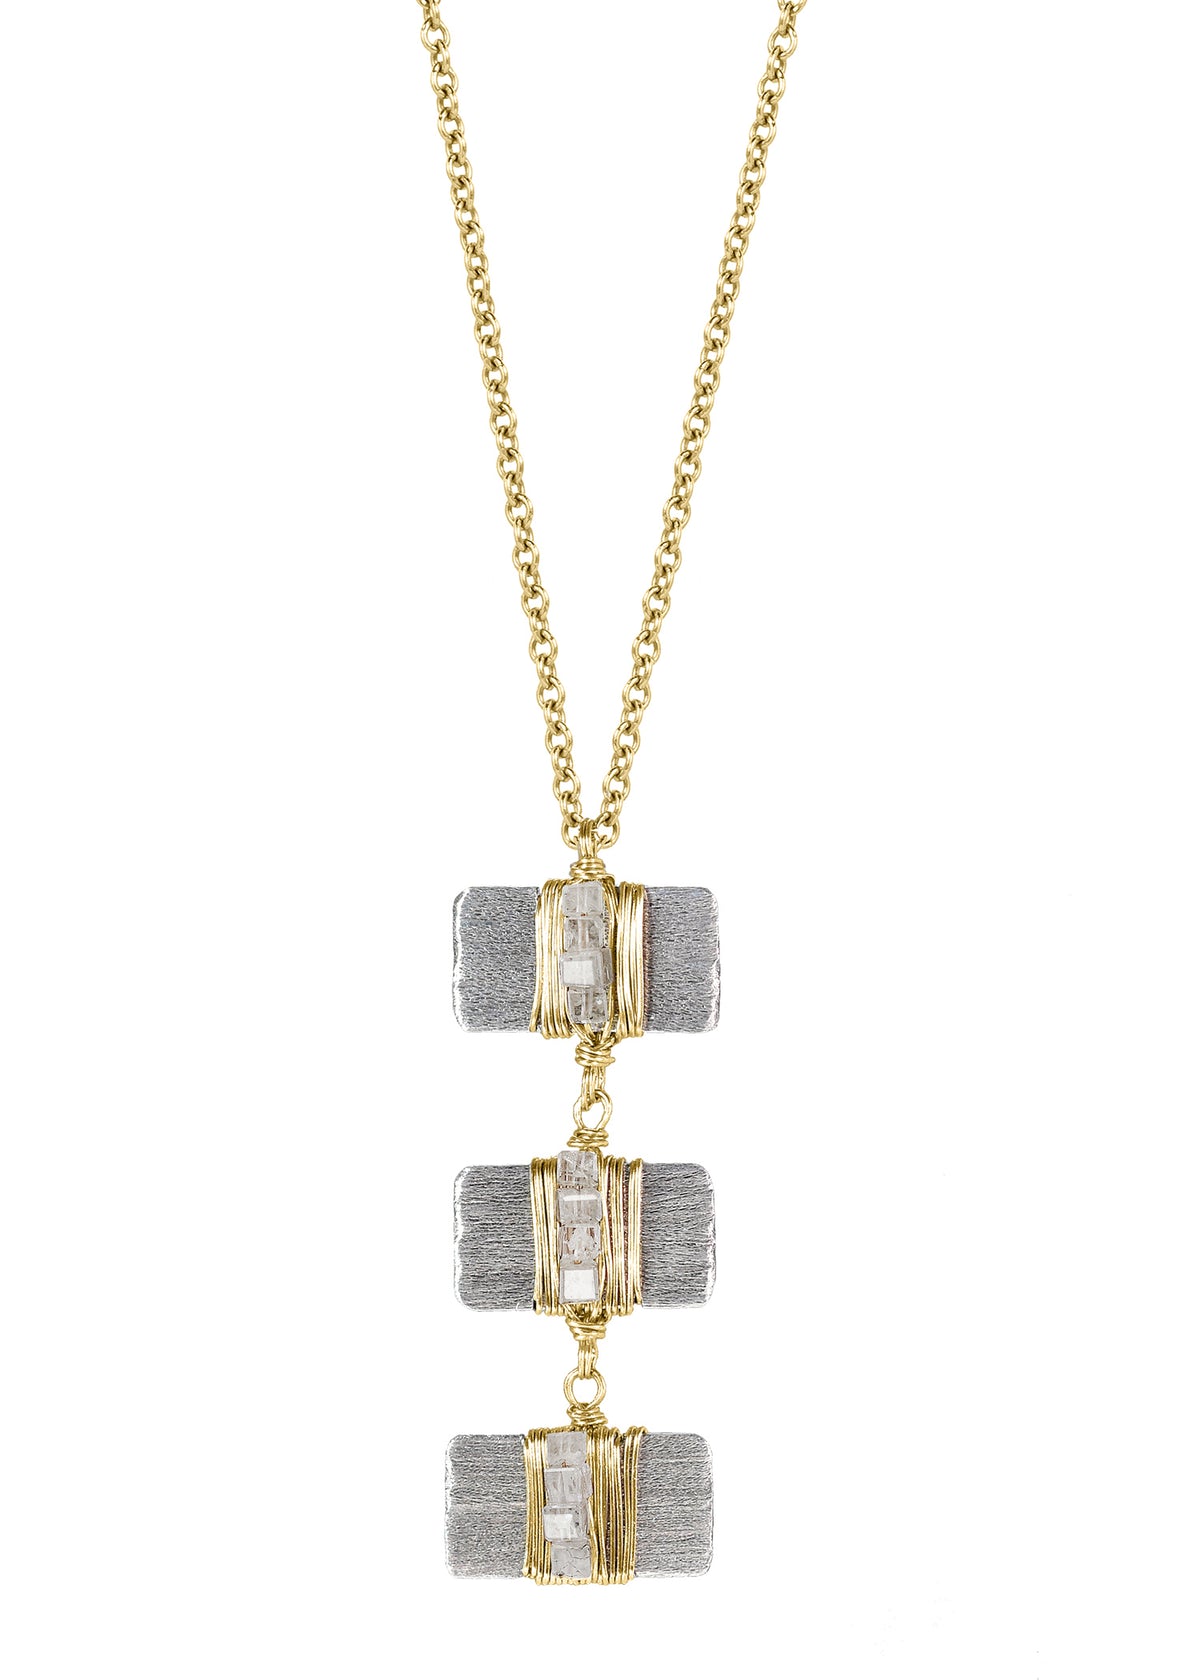 Diamond 14k gold Sterling silver Mixed metal Necklace measures 18&quot; in length Pendant measures 1-1/8&quot; in length and 1/2&quot; in width Handmade in our Los Angeles studio